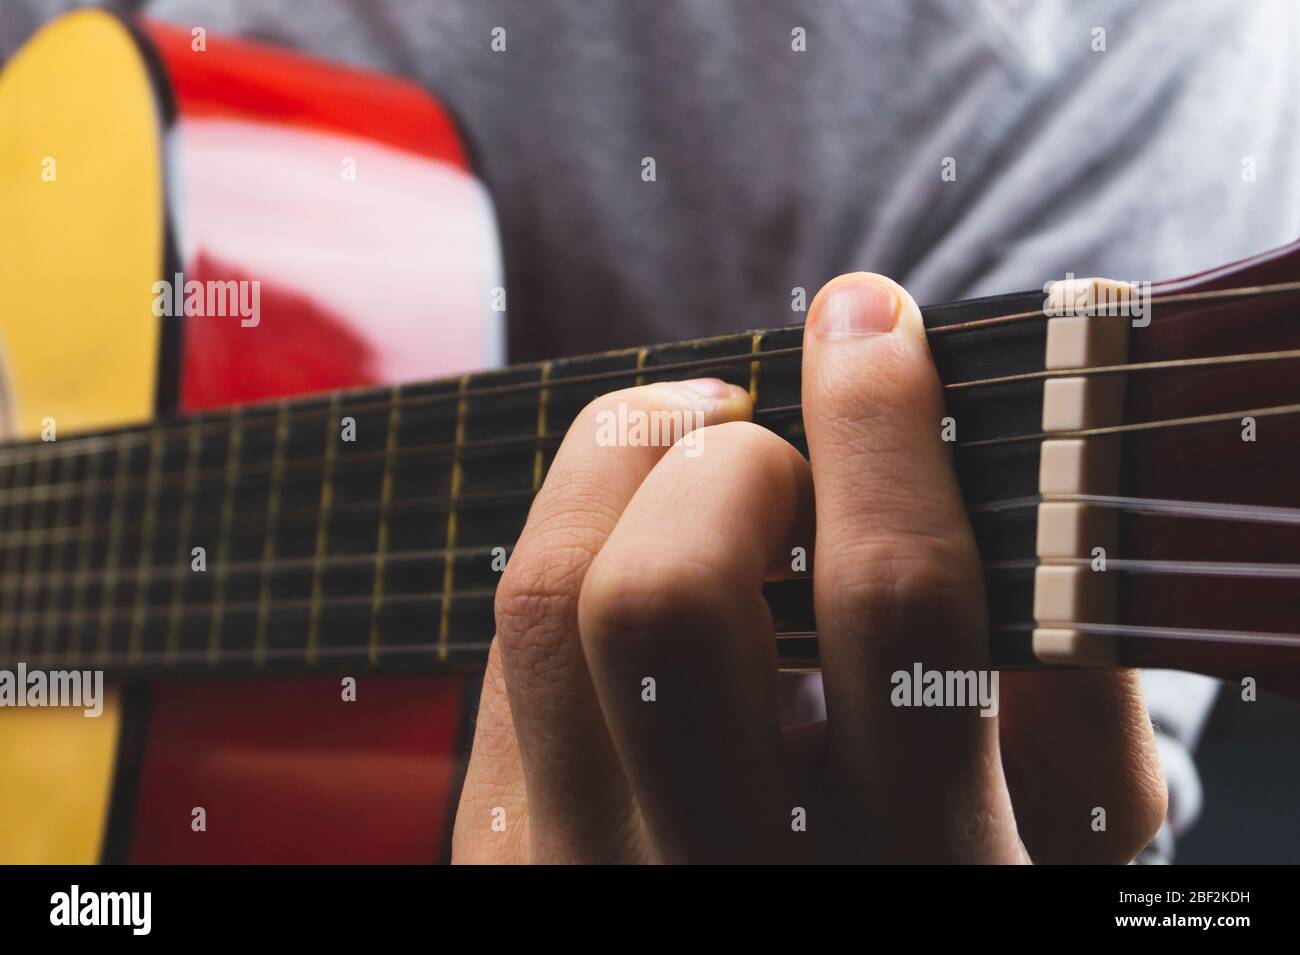 Hand playing acoustic guitar. string instrument Stock Photo